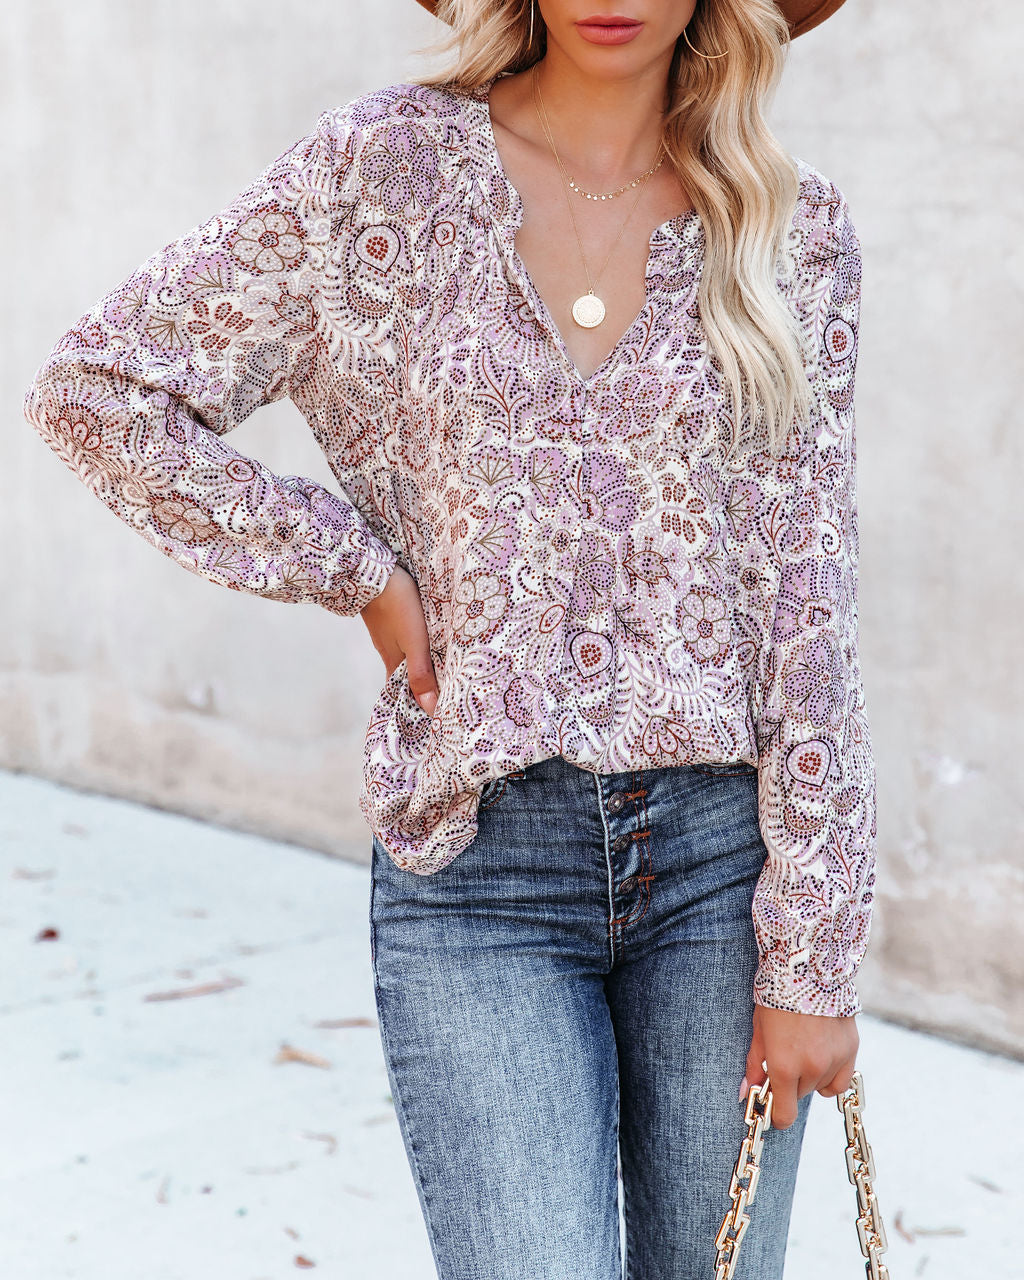 Cantwell Printed Shimmer Damsel Blouse